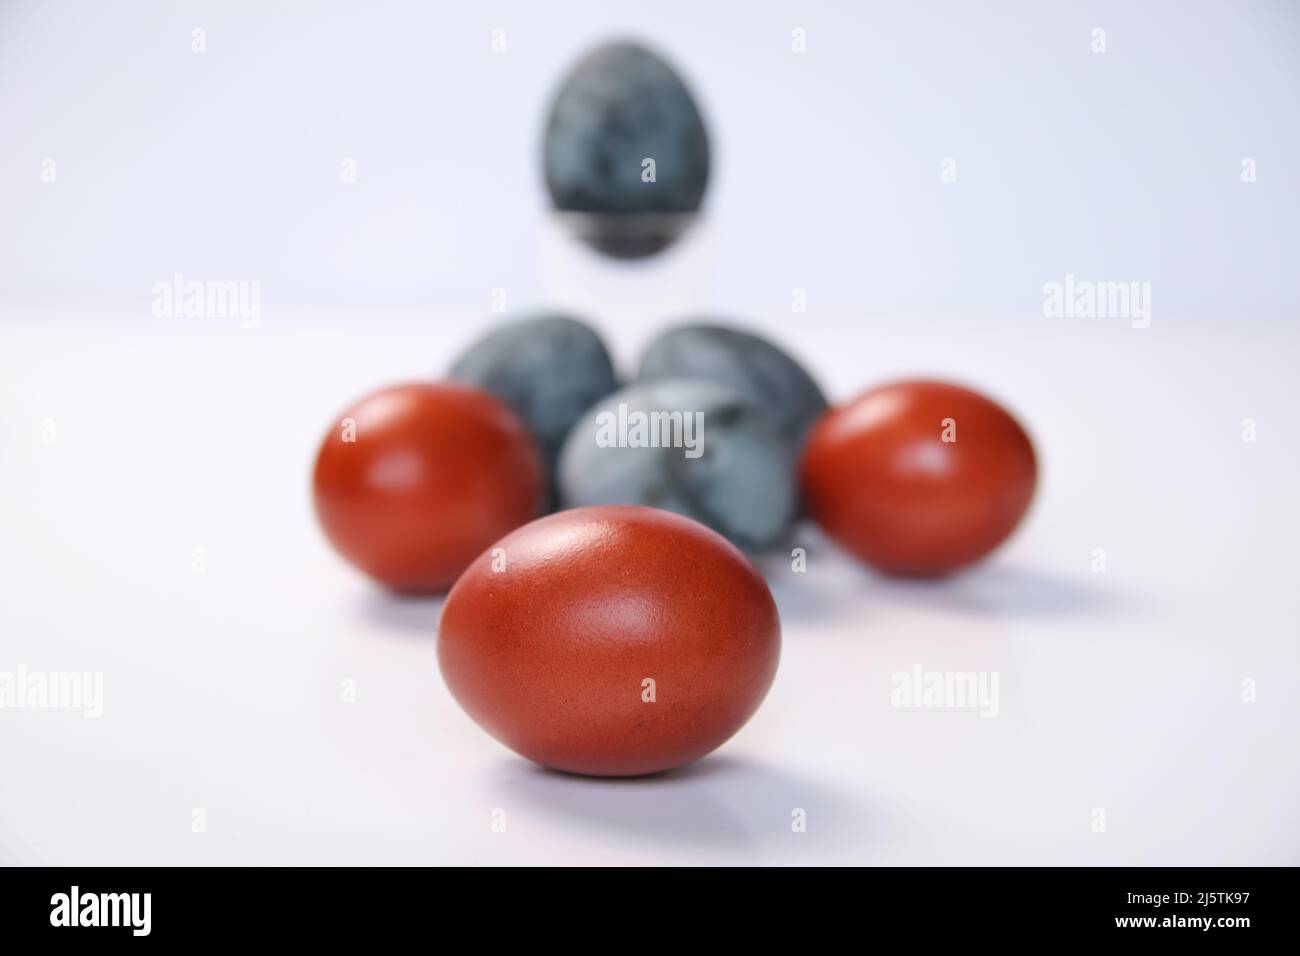 Defocus blue and red eggs on white background. Minimal Easter celebration concept. Design, visual art, minimalism. Balance and harmony concept. Mental Stock Photo